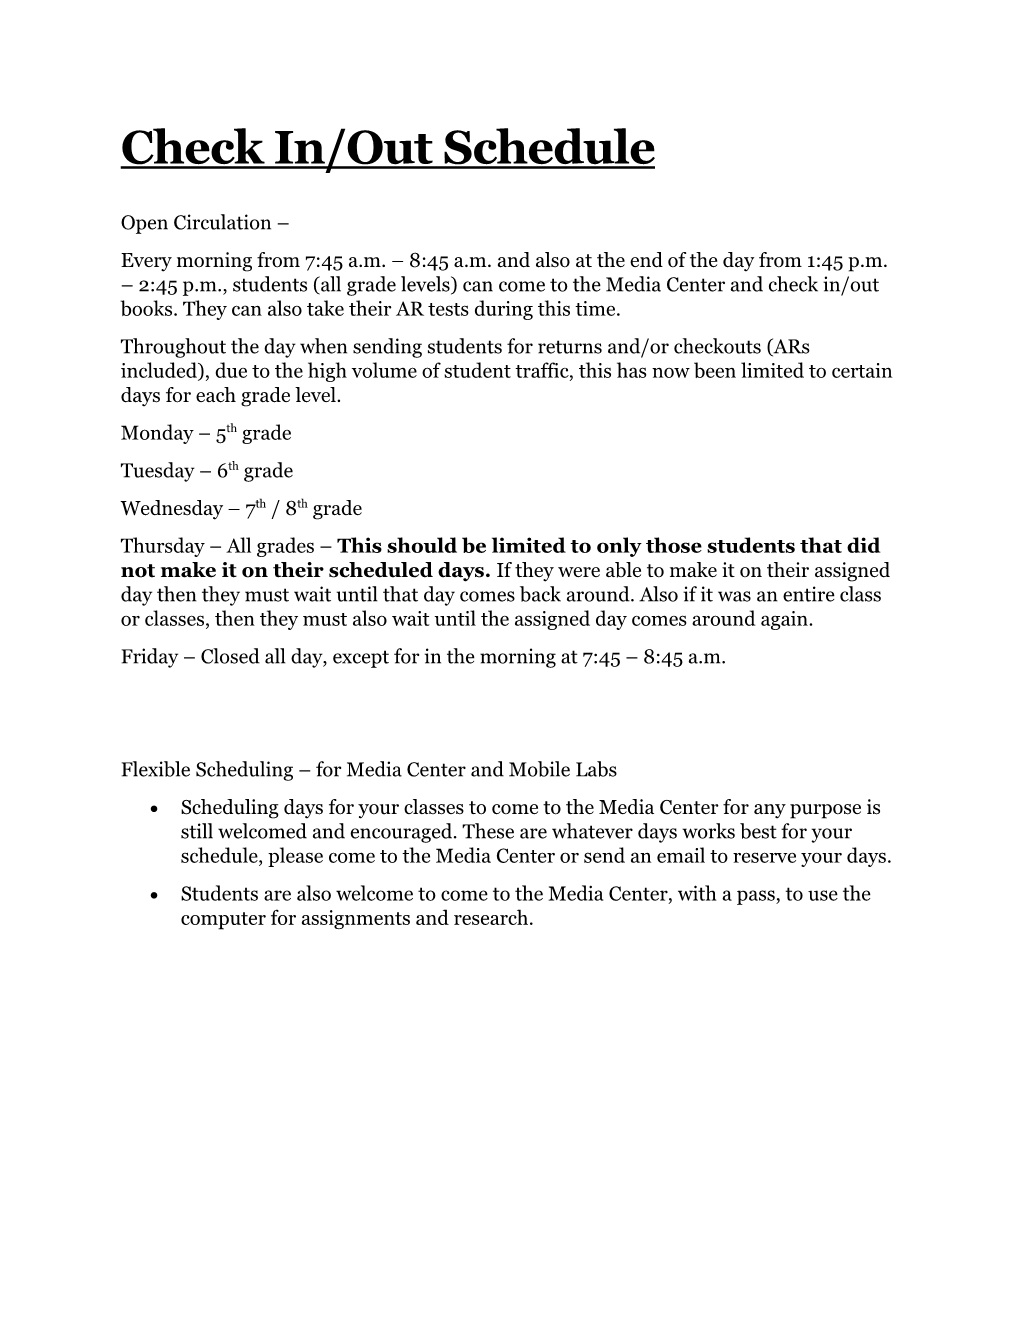 Check In/Out Schedule